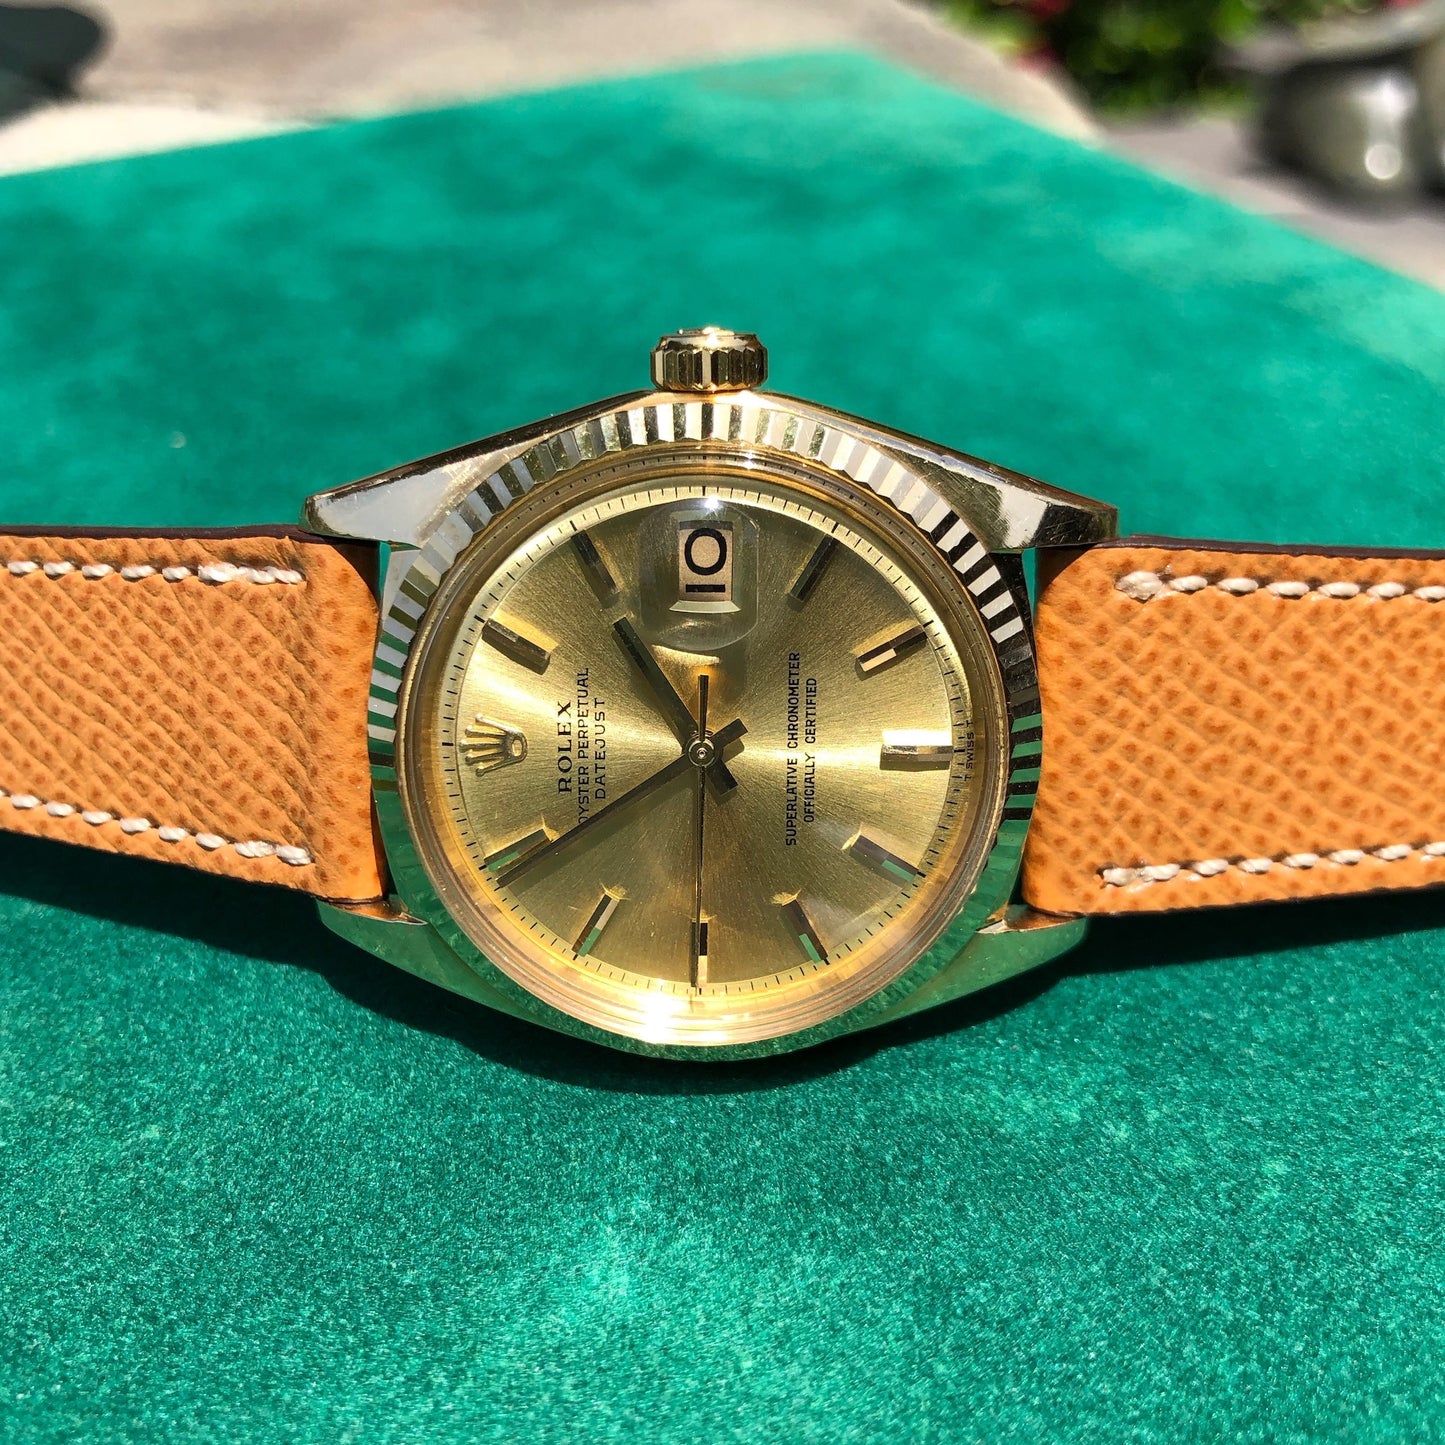 1969 Vintage Rolex Datejust 1601 18K Yellow Gold Champagne Automatic Wristwatch Guarantee Booklets - Hashtag Watch Company